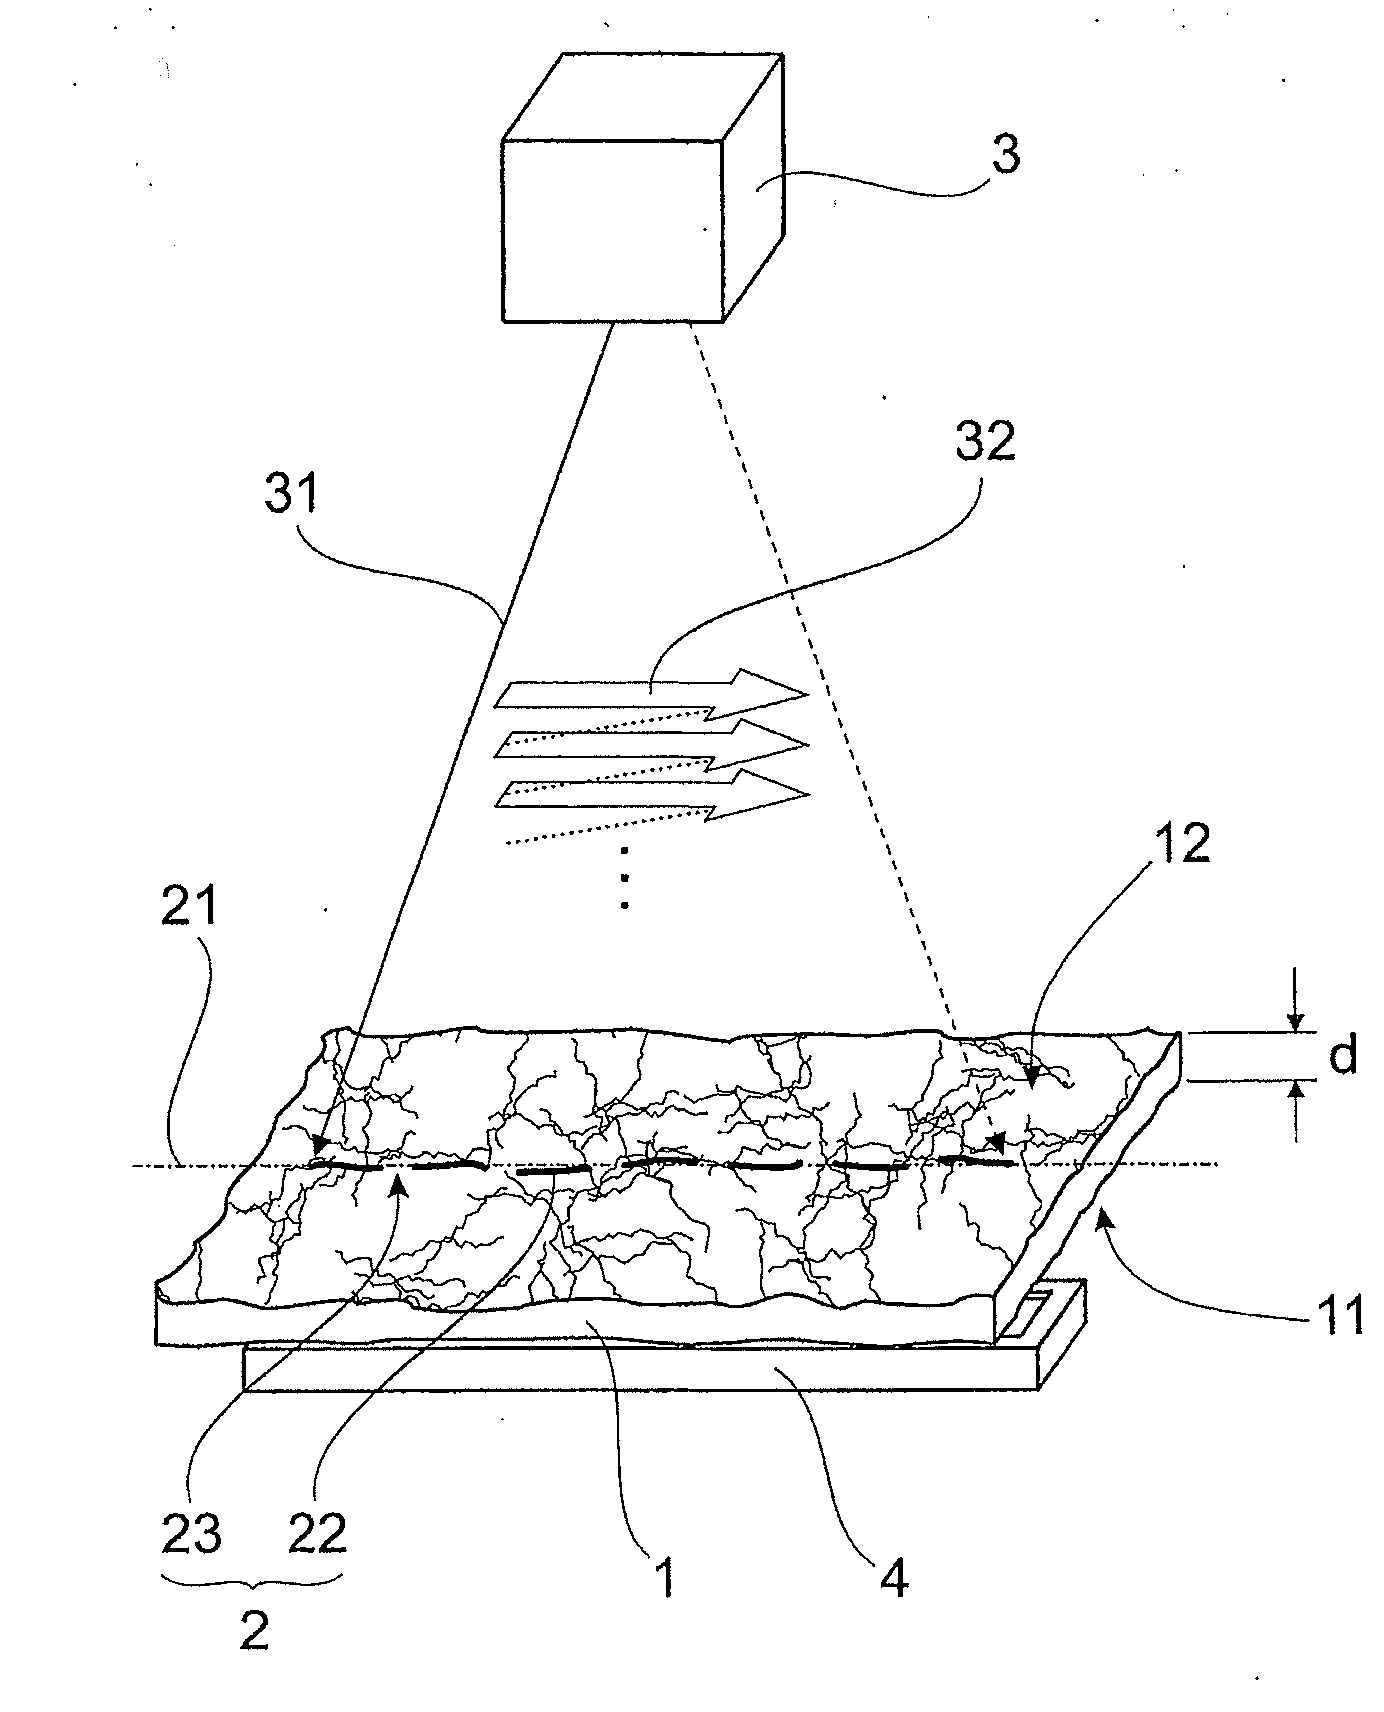 Process for Introducing a Weakening Line Through Material Removal on a Fibrous Coating Material, in Particular Natural Leather